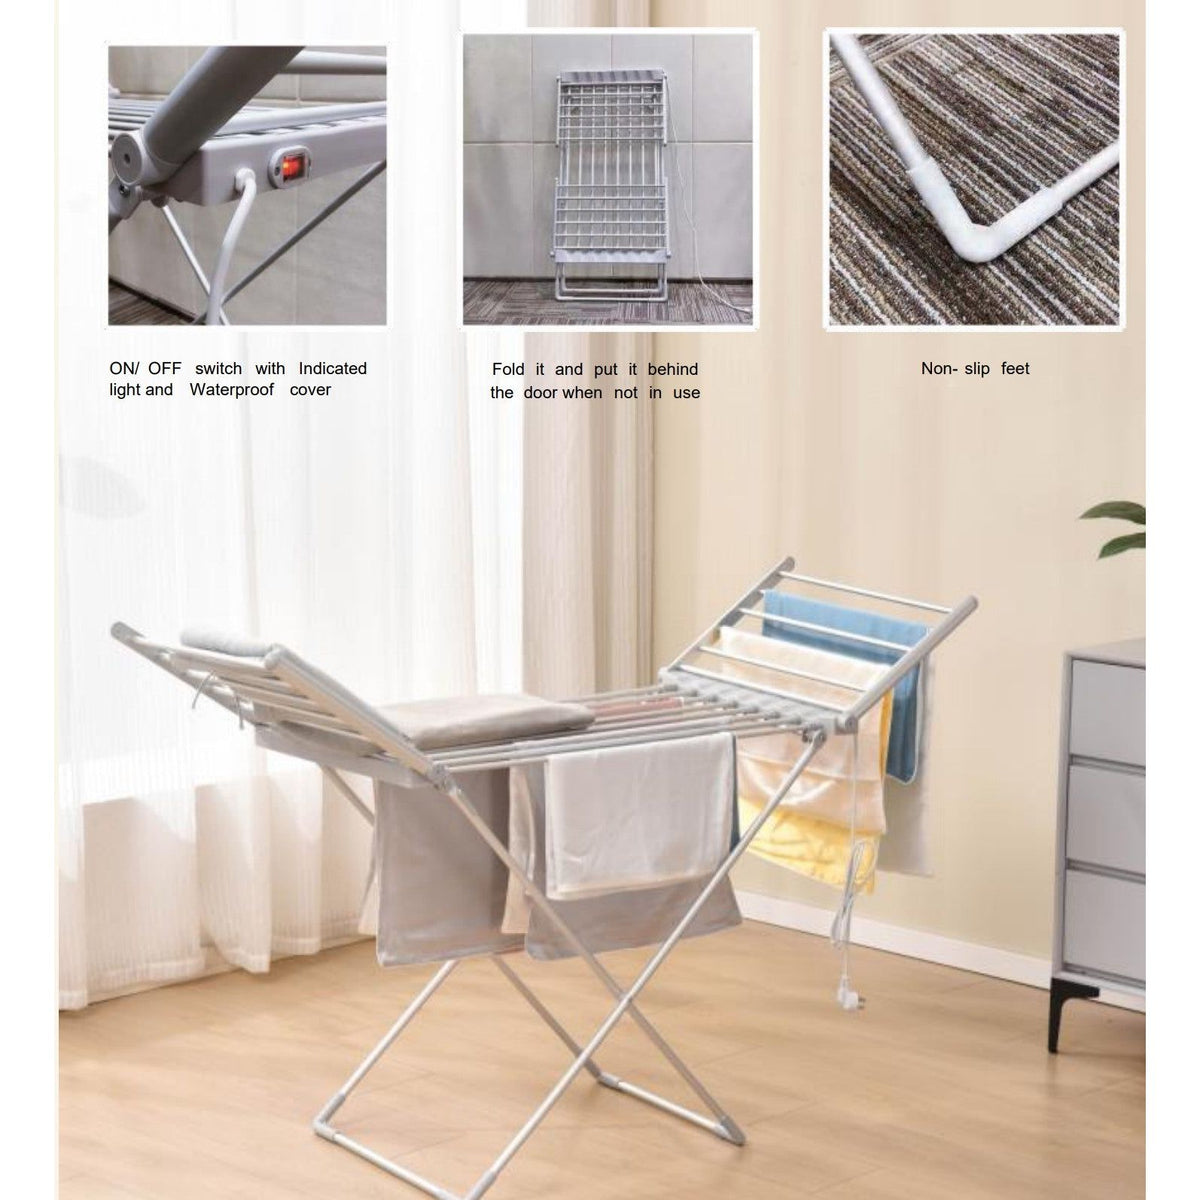 Schuss Foldable Electric Towel Warmers - White | SHXECDUK from Schuss - DID Electrical